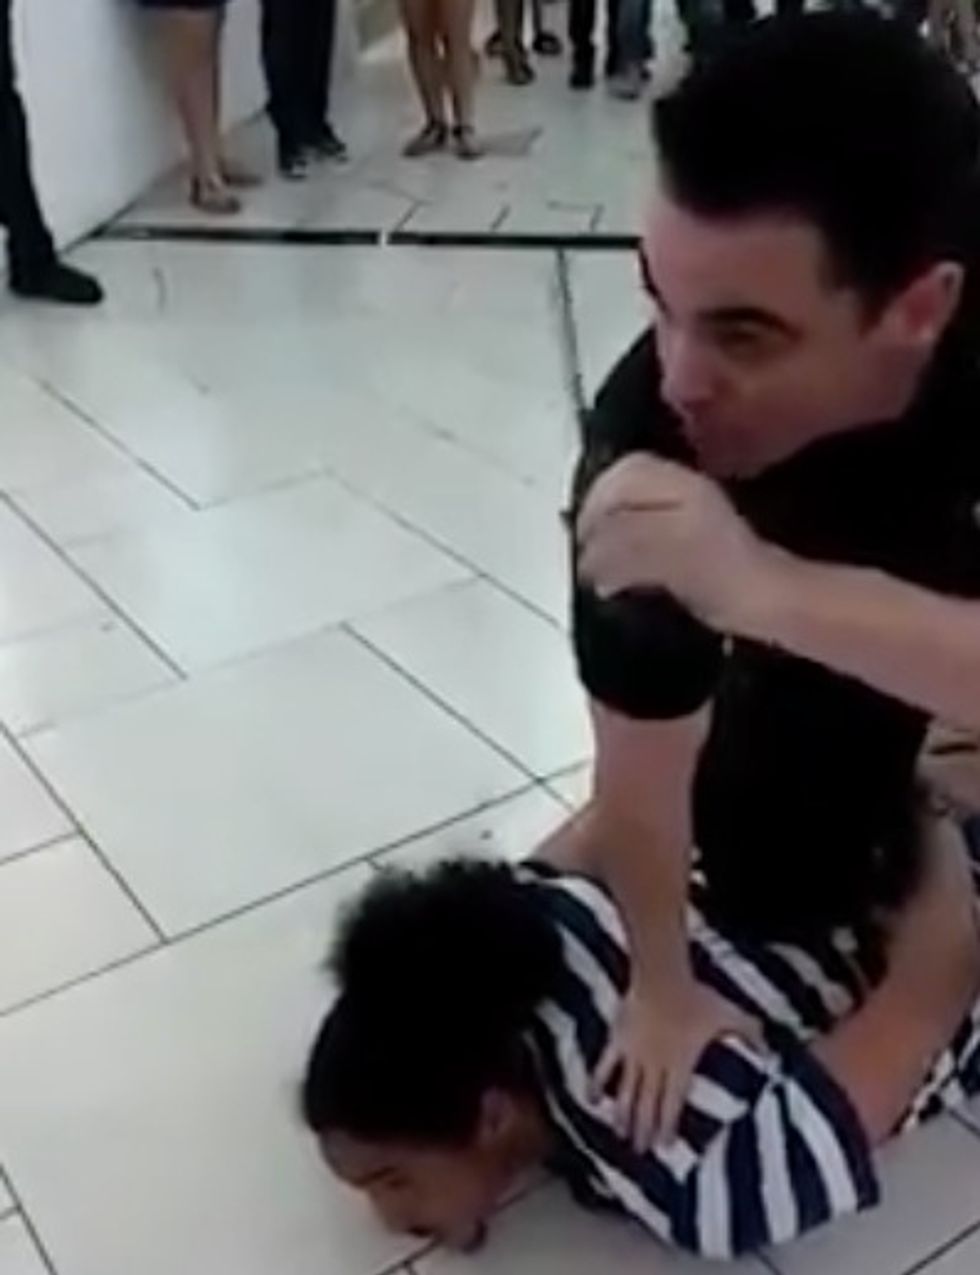 Texas Man’s Arrest at Mall Captured on Video, but Suspect and Police Tell Very Different Stories